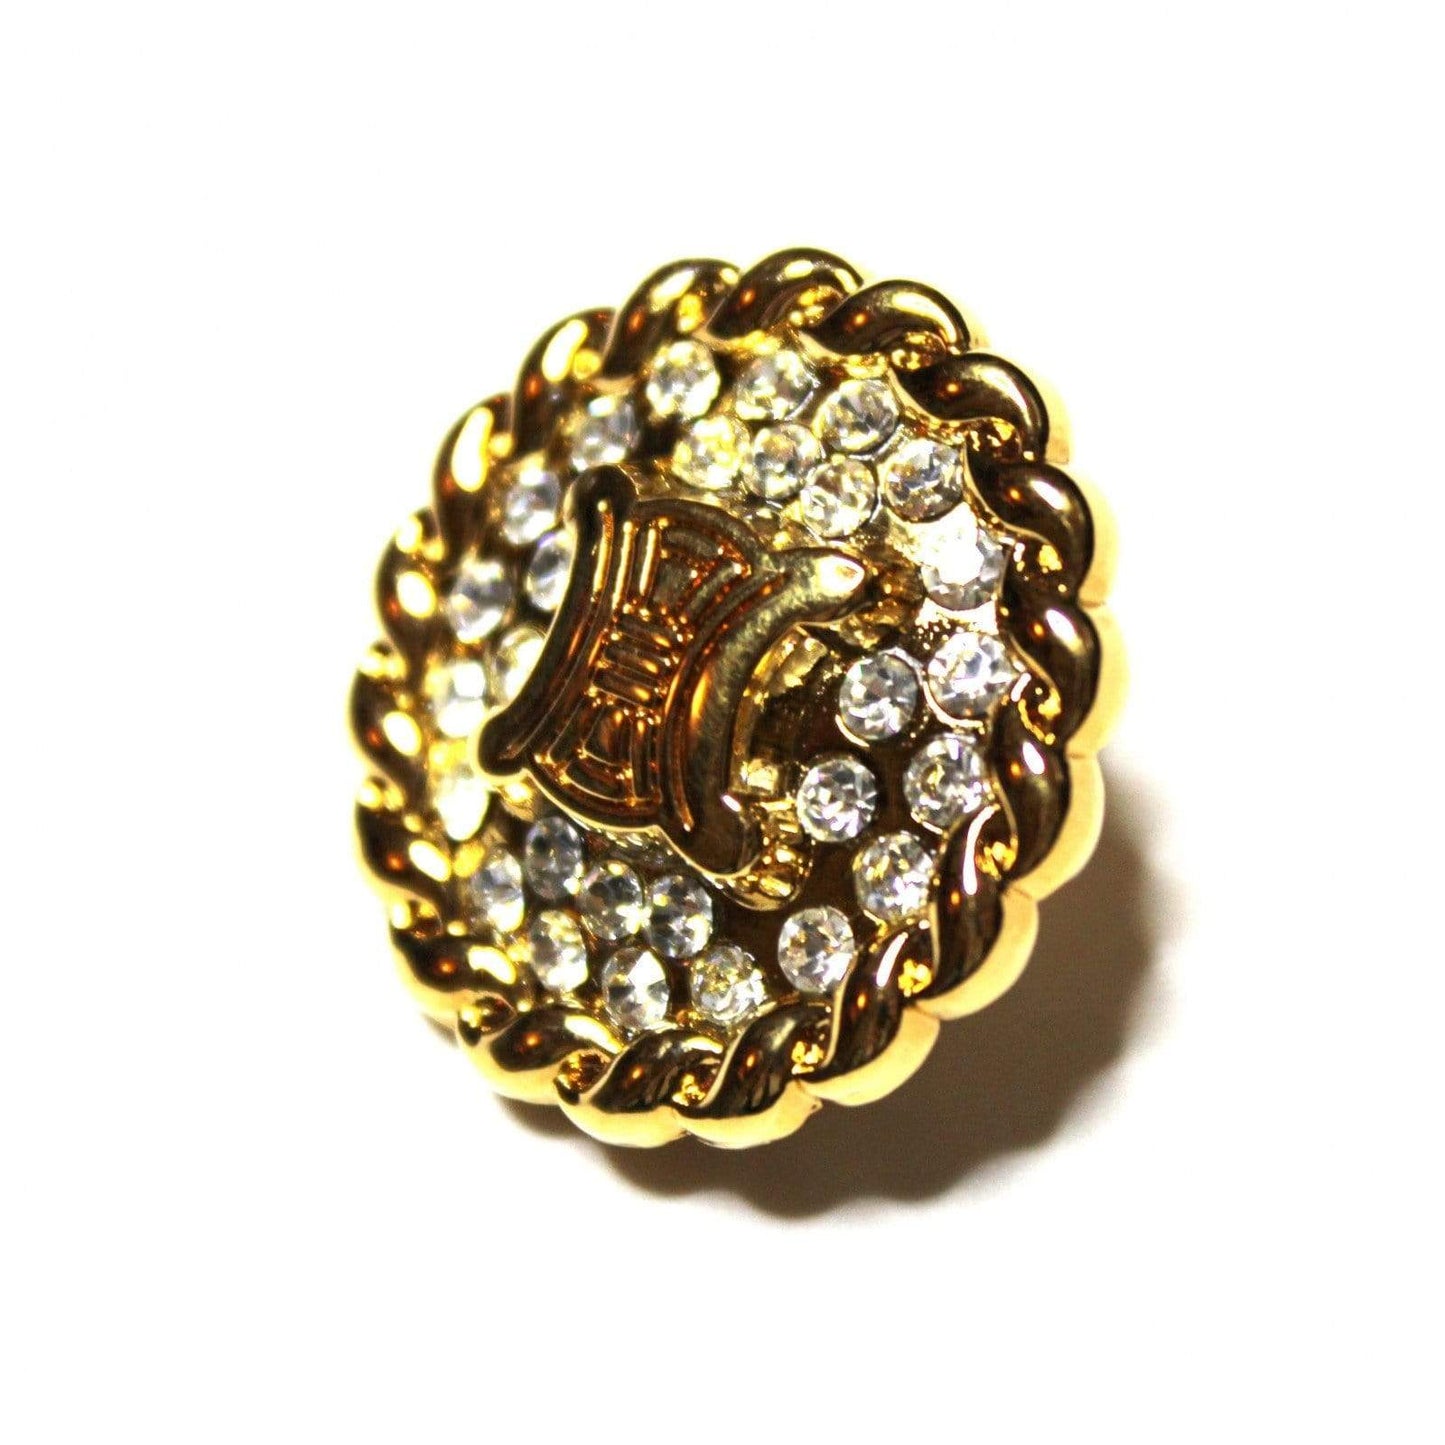 Gold Celine Logo Pin with Crystal Accents RSTKD Vintage